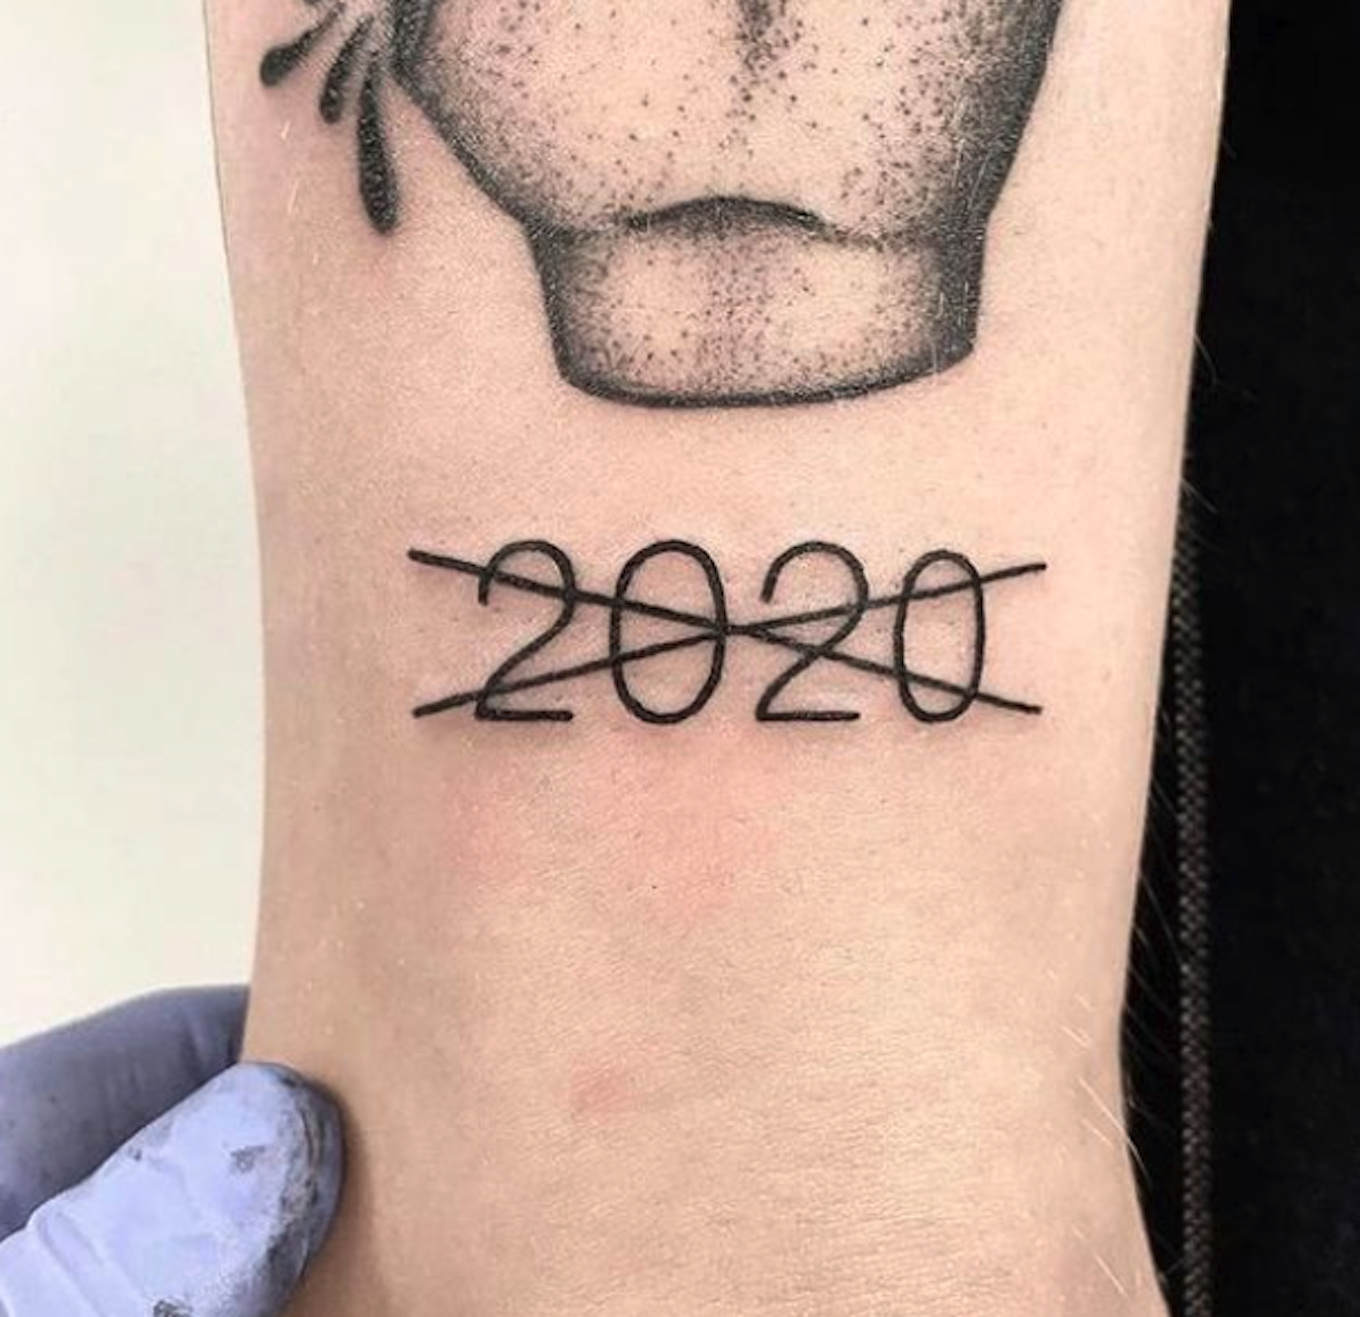 2020 commemorative tattoo done by Derrick at Paradox in Bonney Lake WA  Featuring a tag from an actual dumpster Sad Lad  rtattoos